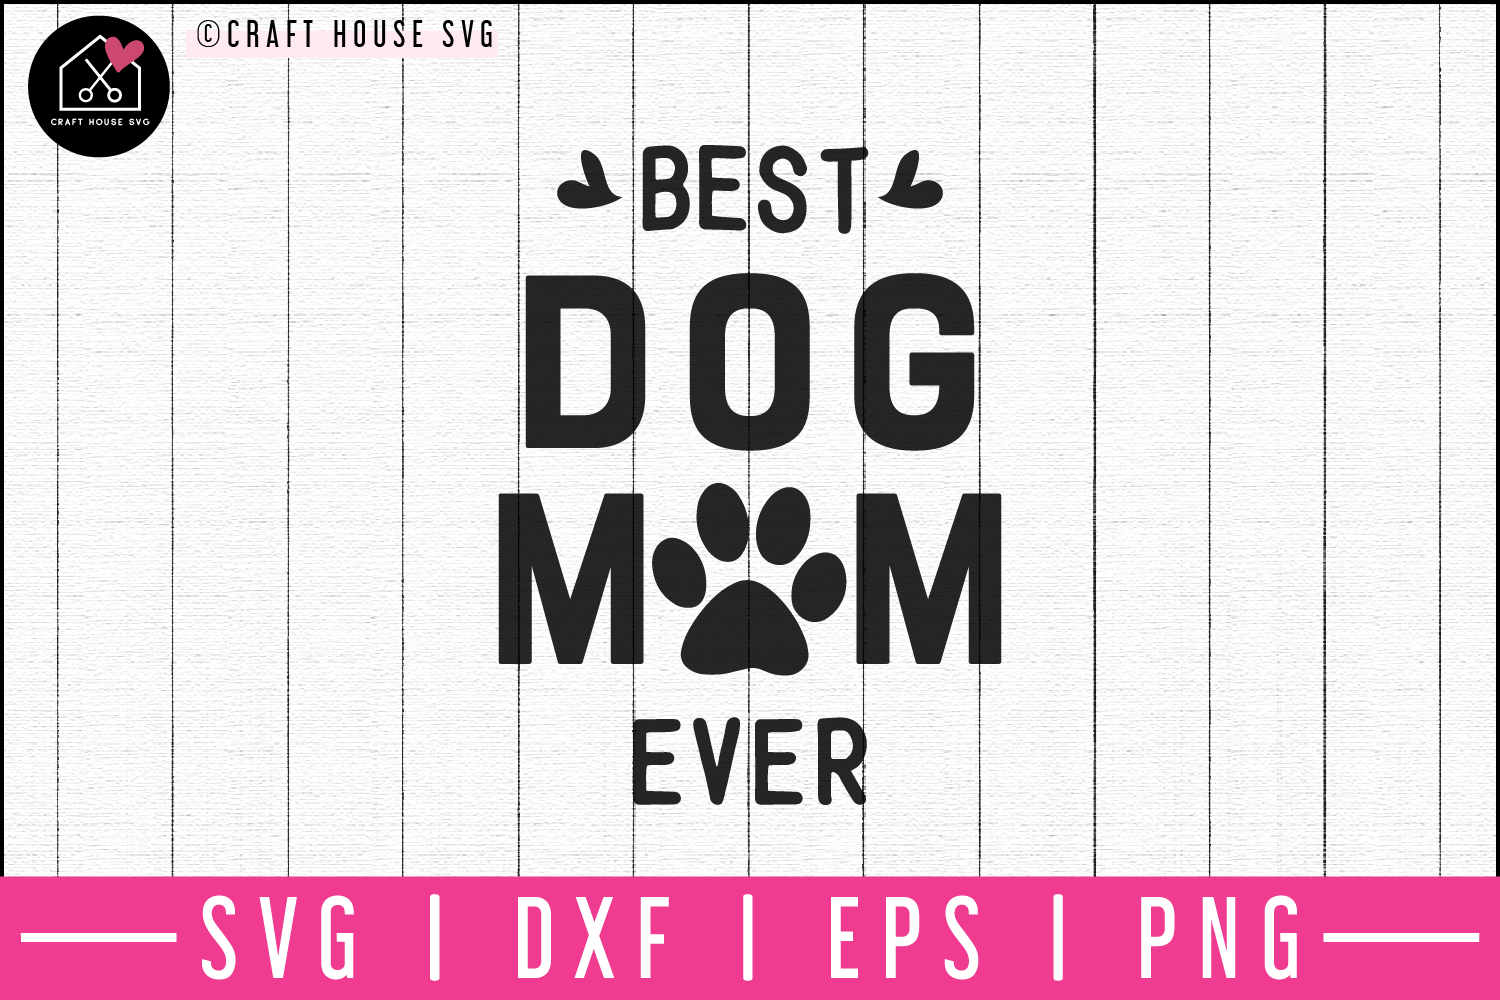 Best dog mom ever SVG | M52F Craft House SVG - SVG files for Cricut and Silhouette